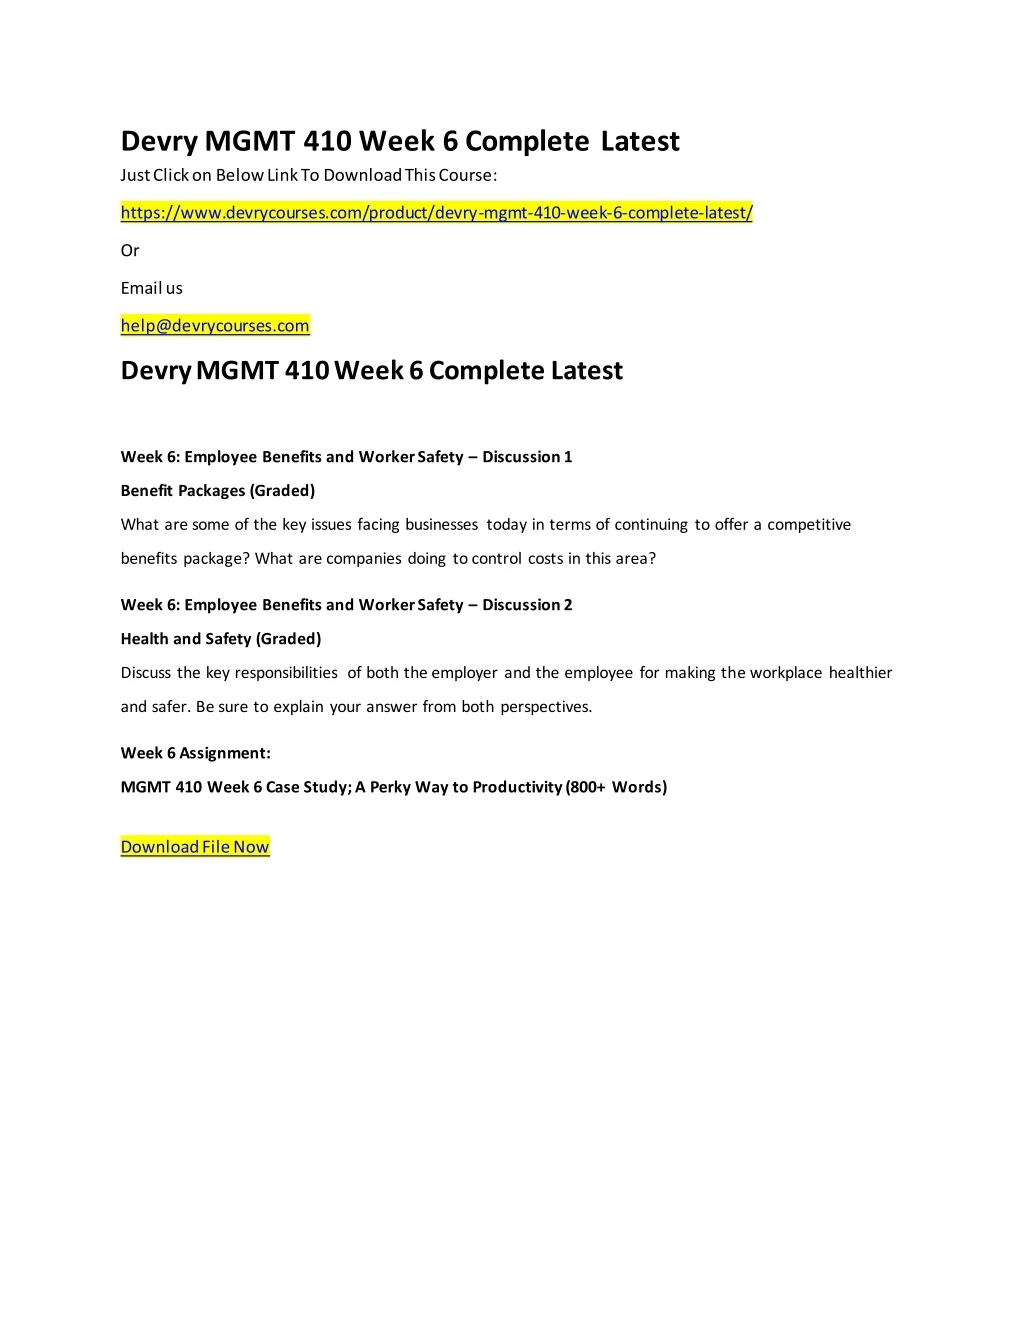 devry mgmt 410 week 6 complete latest just click